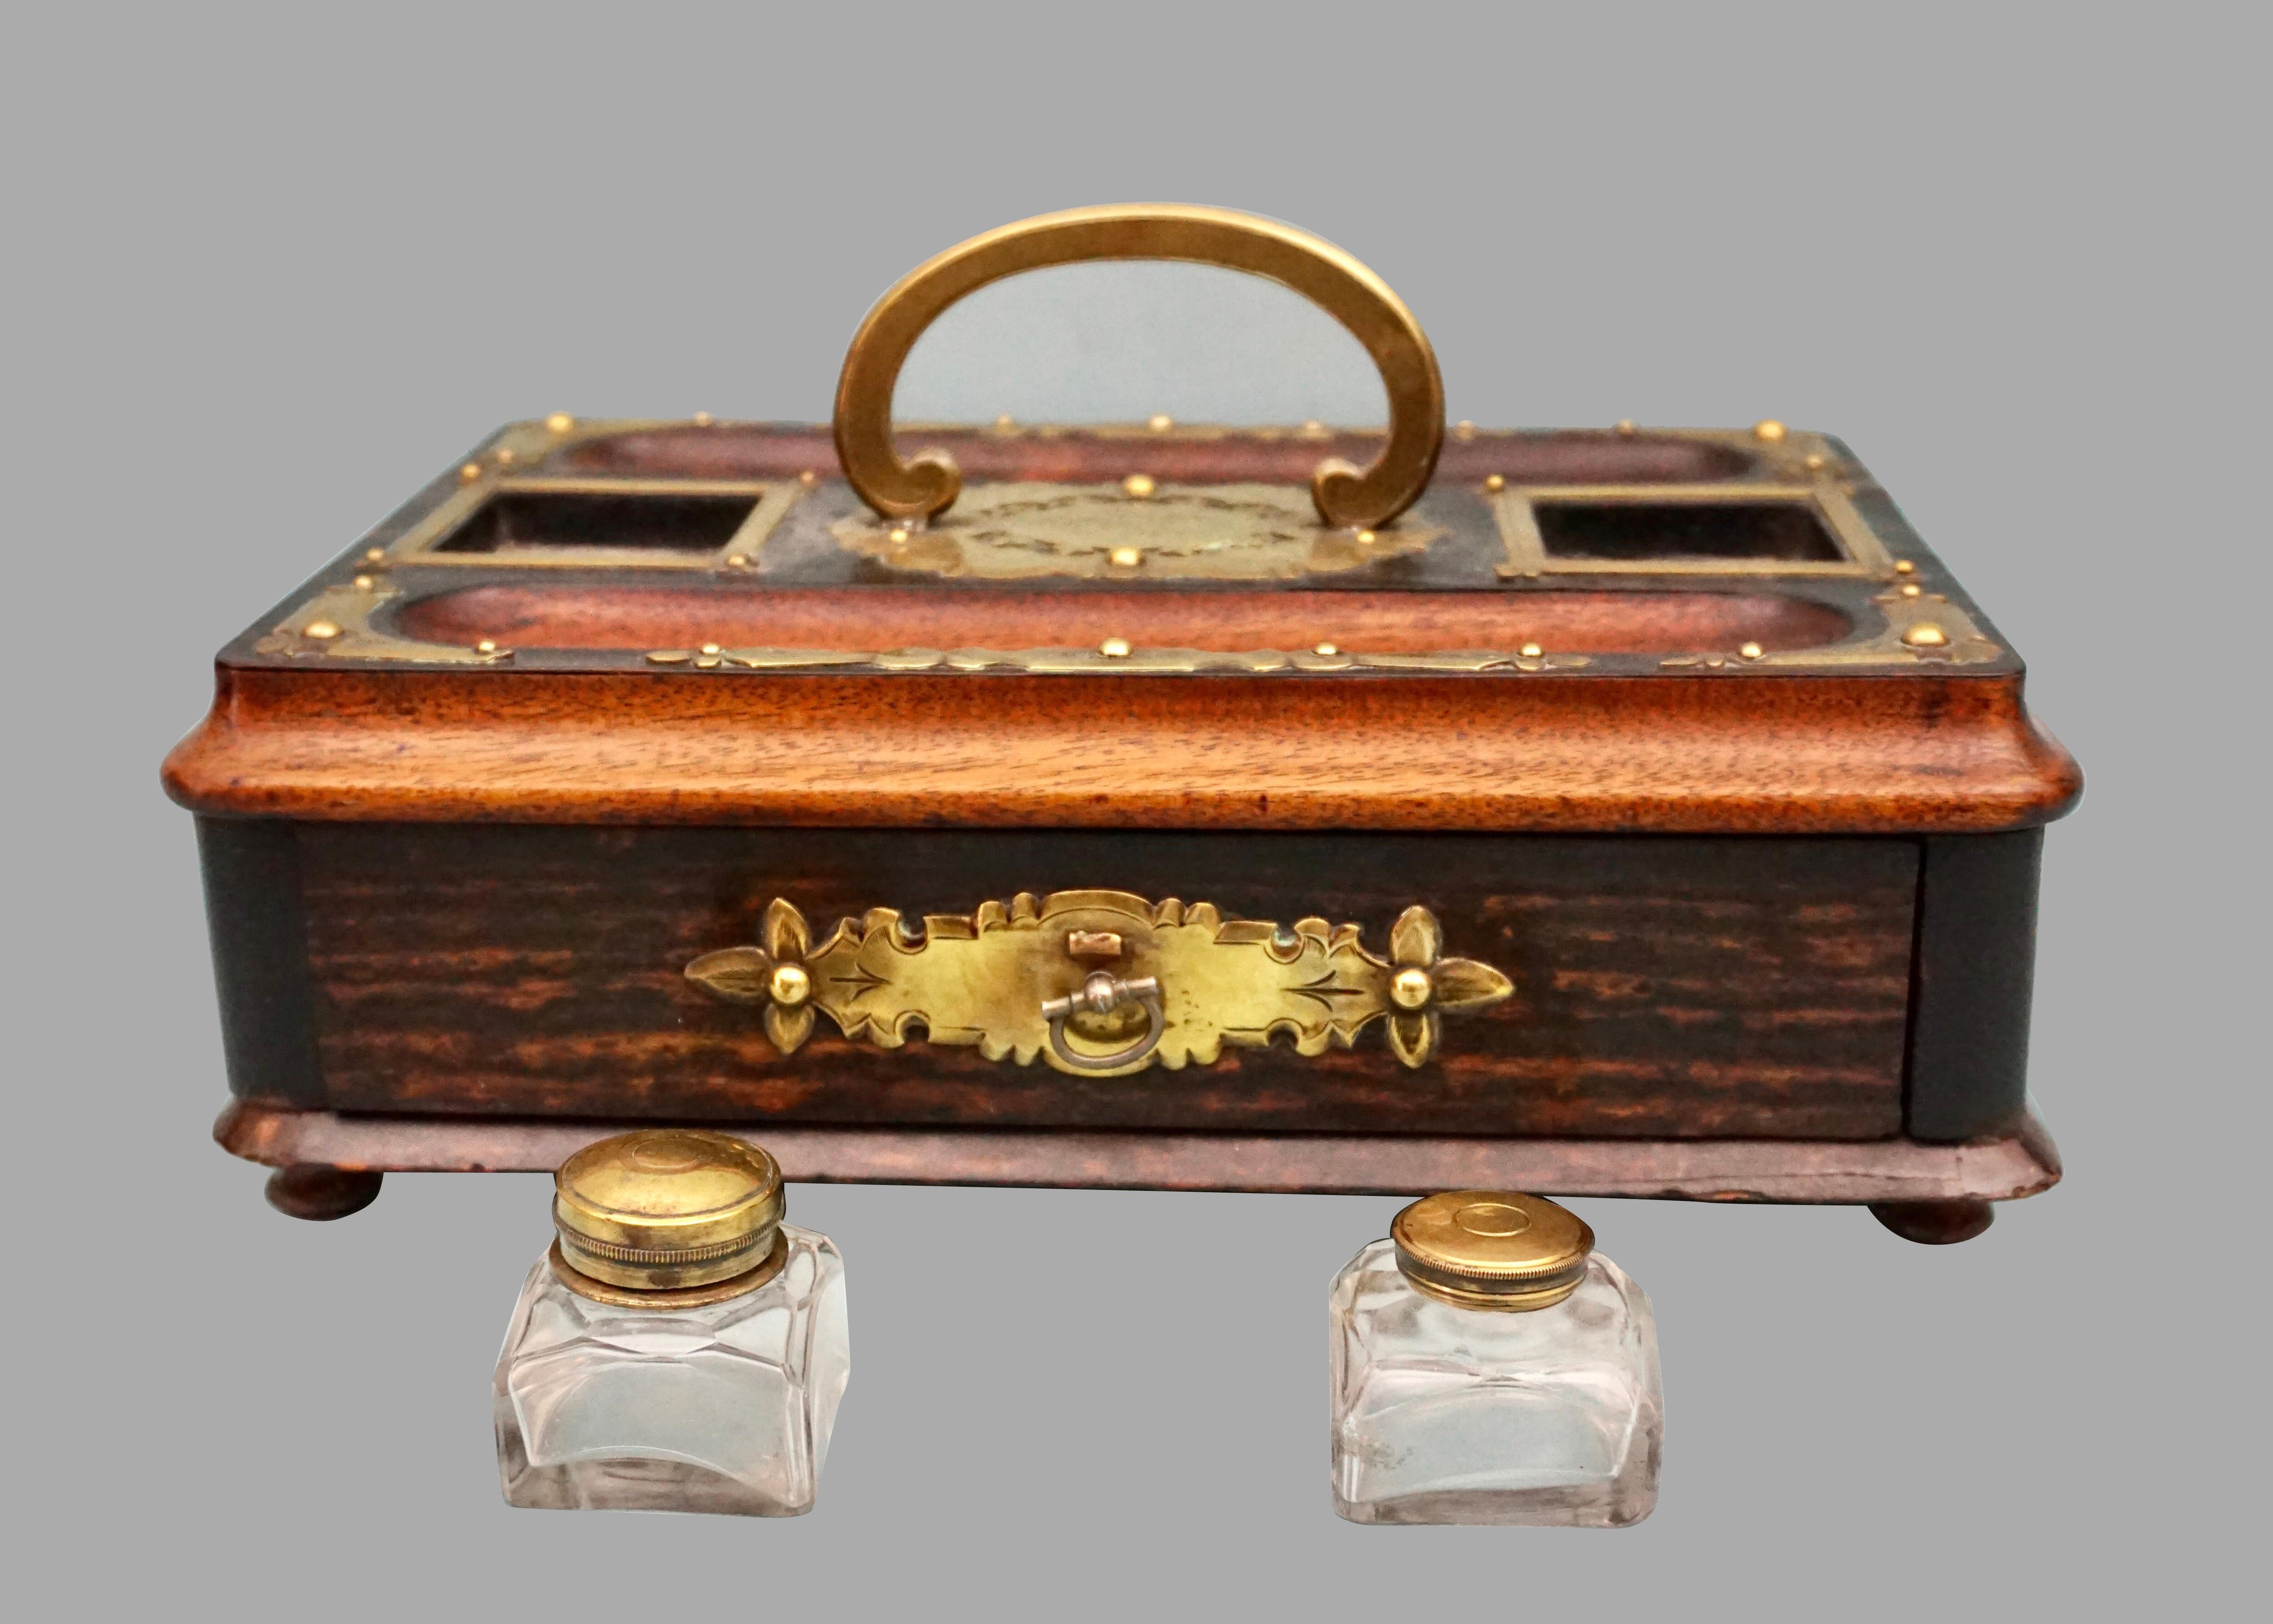 An English brass mounted standish with a single drawer and a central handle flanked by 2 replaced inkwells. The piece is centered by a beautifully engraved brass decorative element and additional brass decoration around the perimeter.
The drawer is